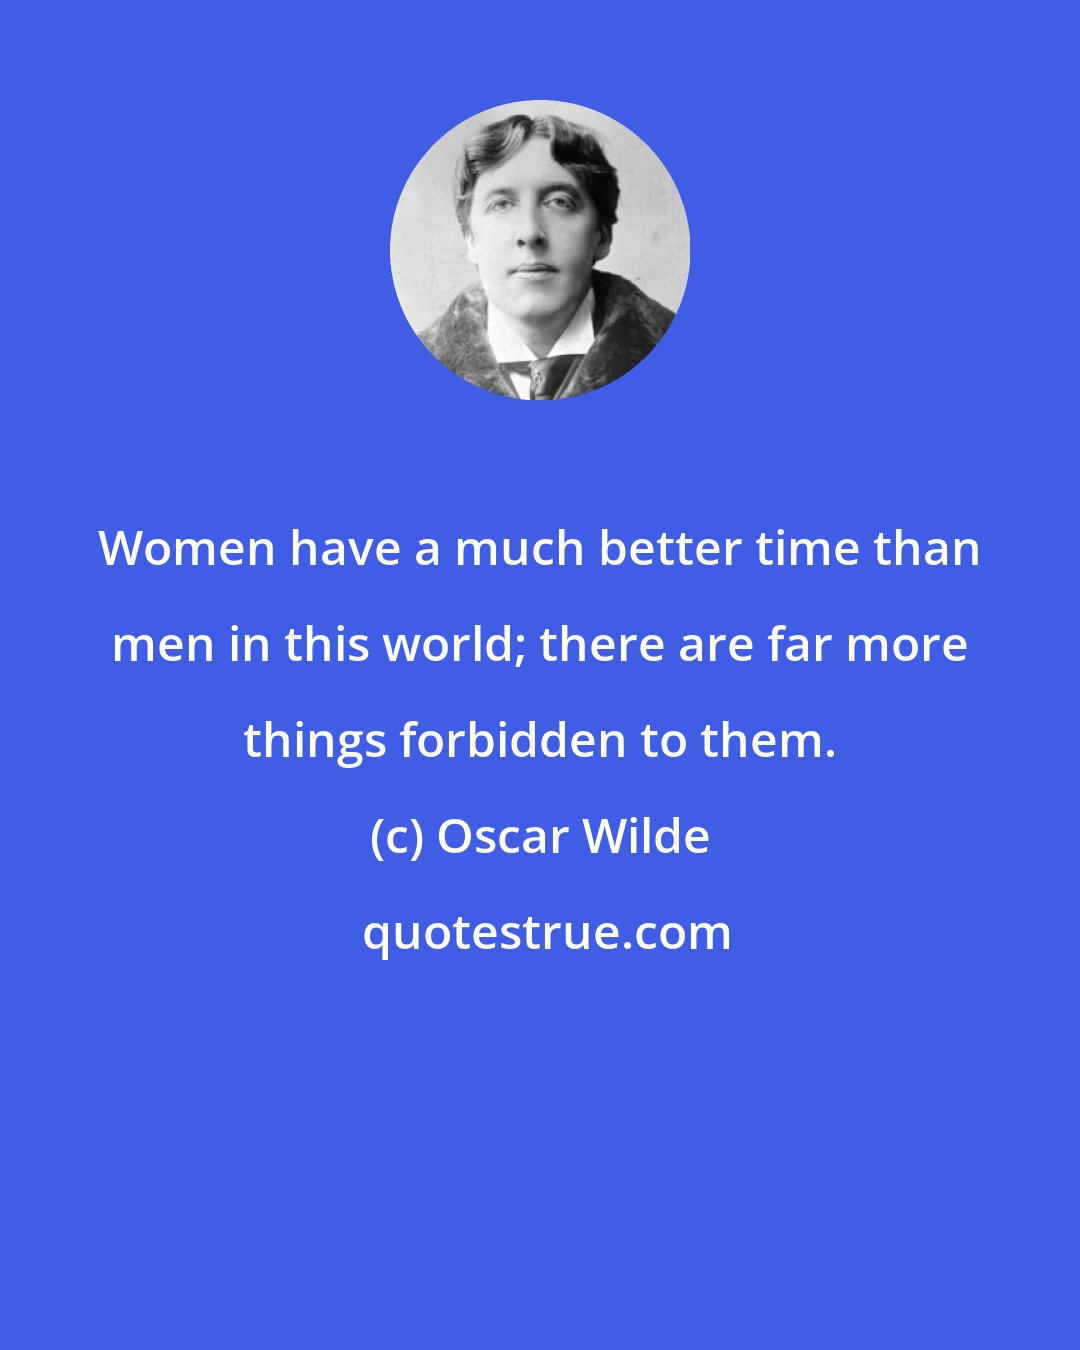 Oscar Wilde: Women have a much better time than men in this world; there are far more things forbidden to them.